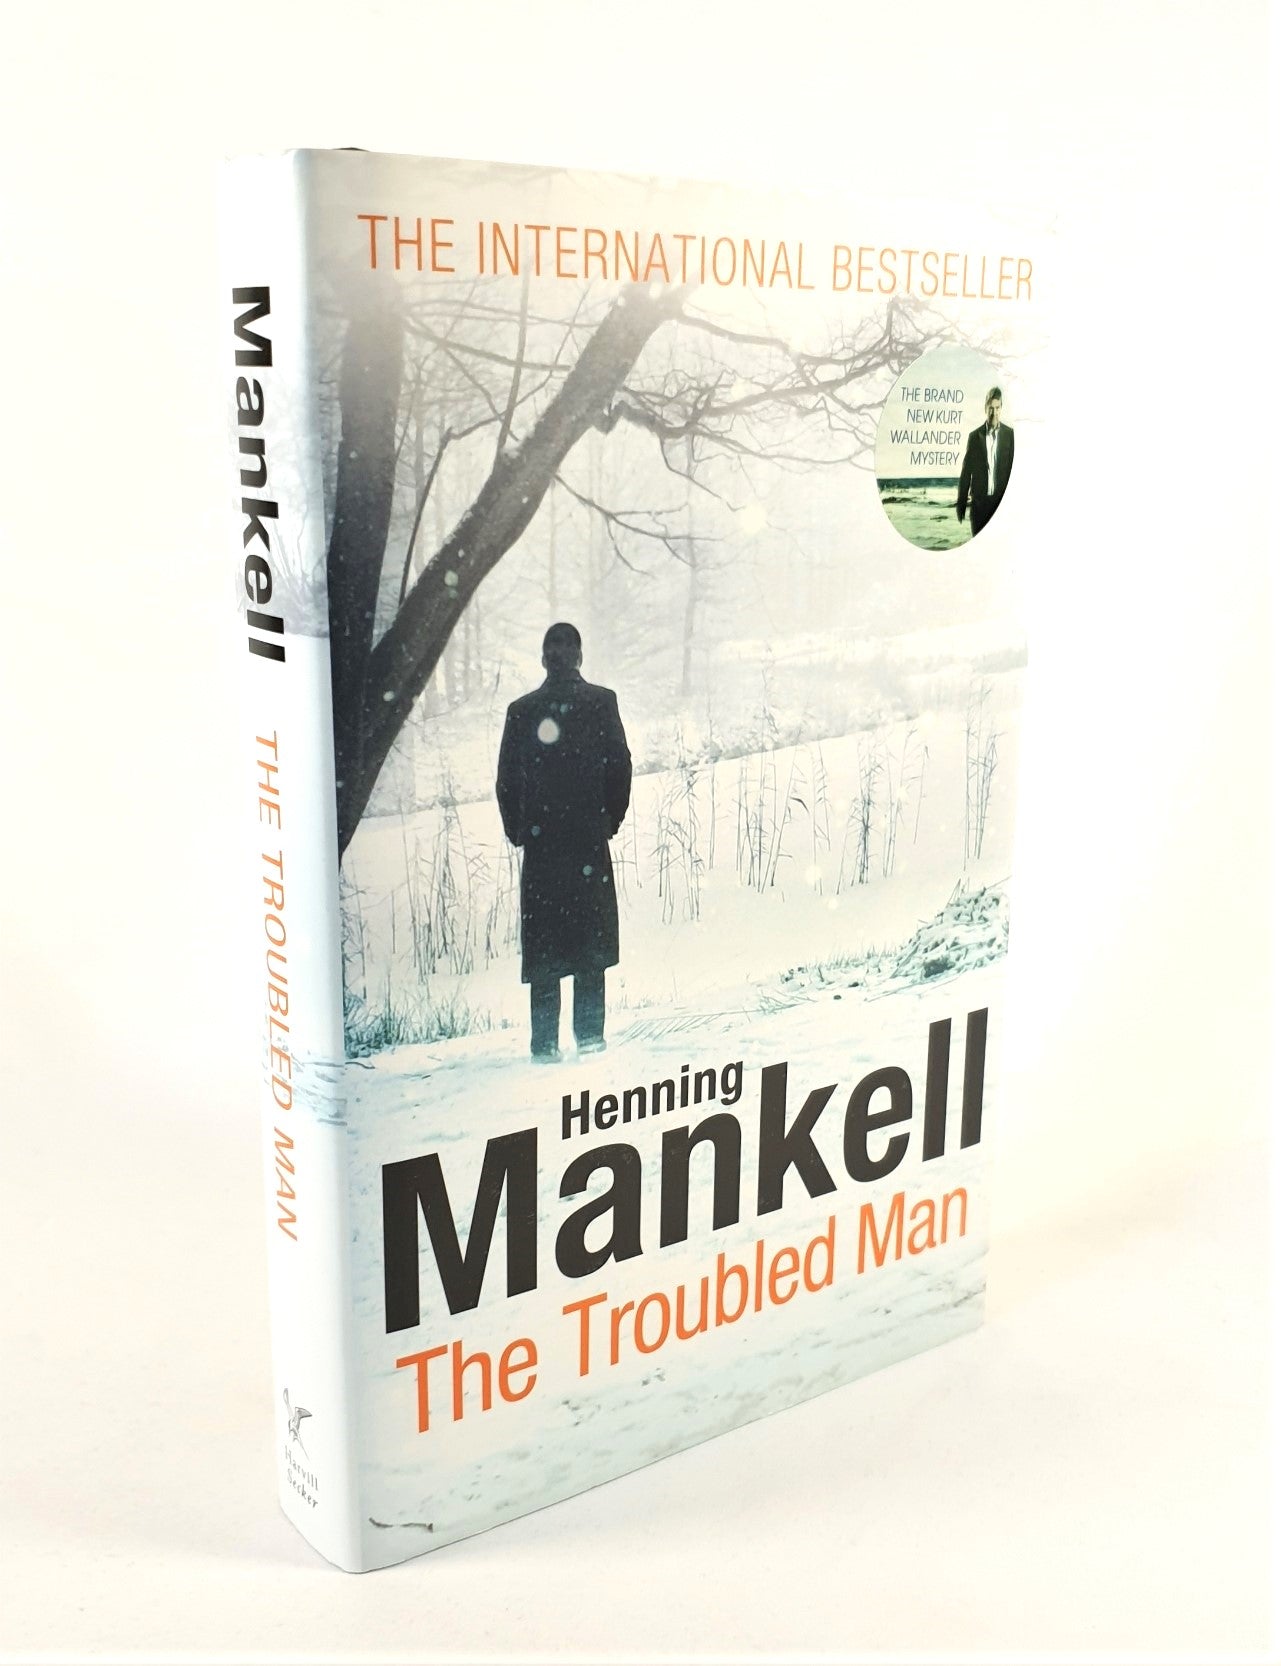 Mankell, Henning - The Troubled Man (Signed)